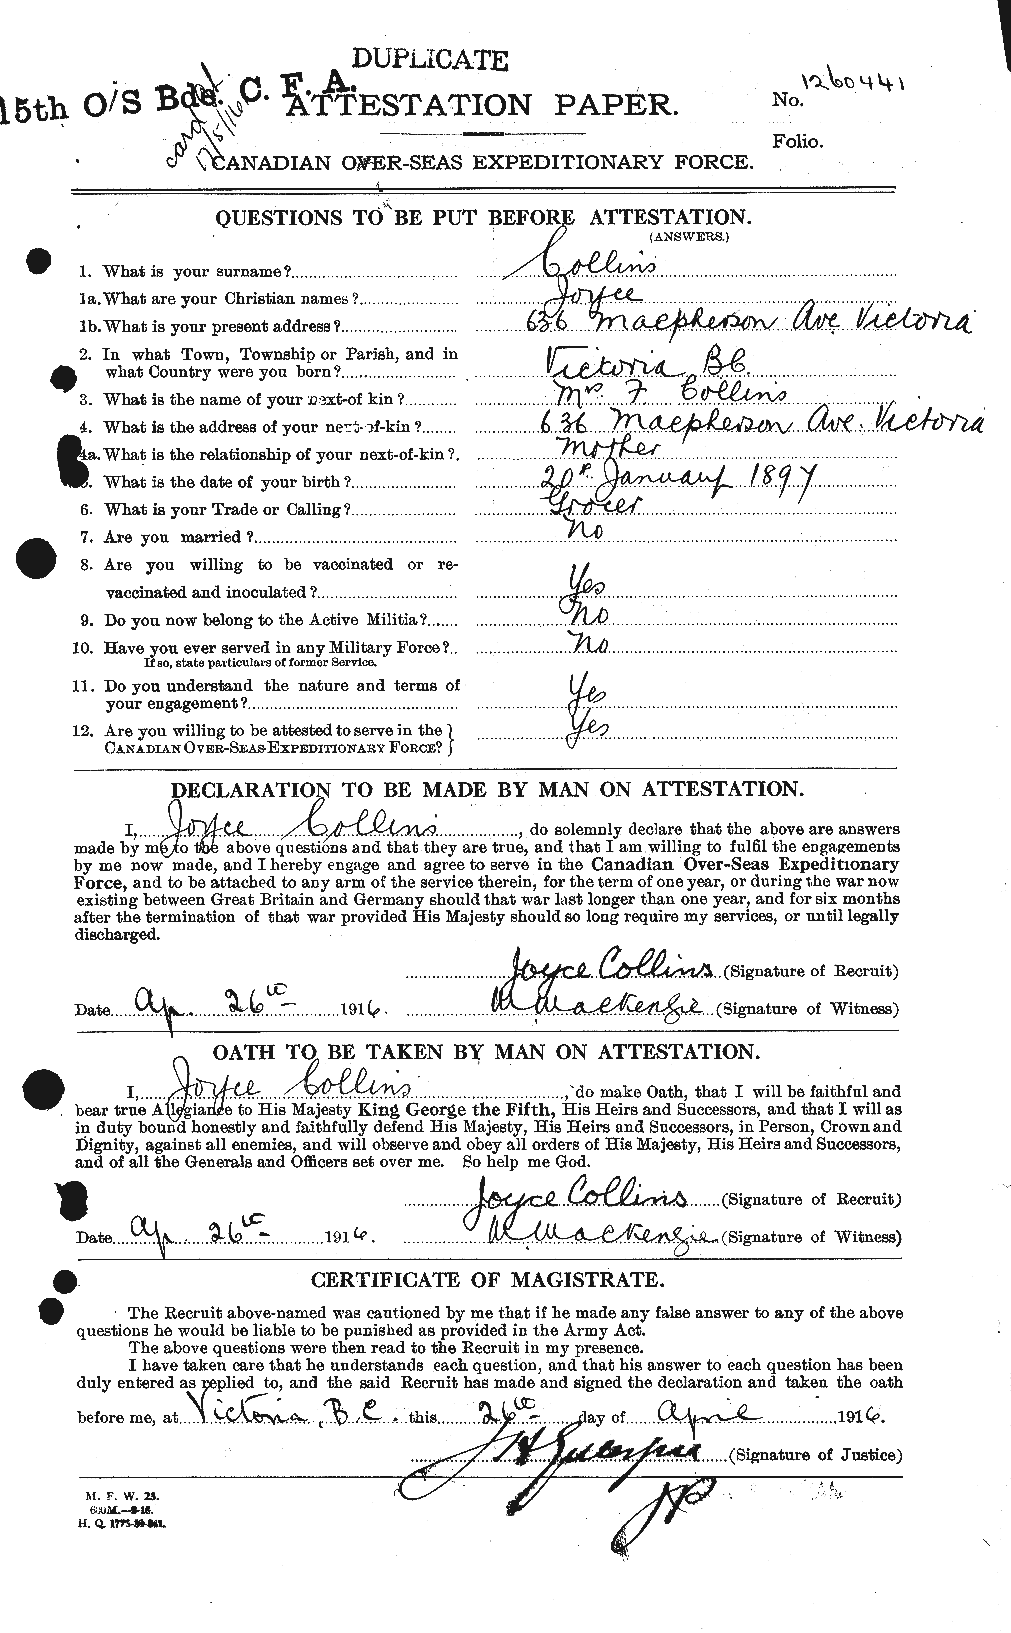 Personnel Records of the First World War - CEF 069507a